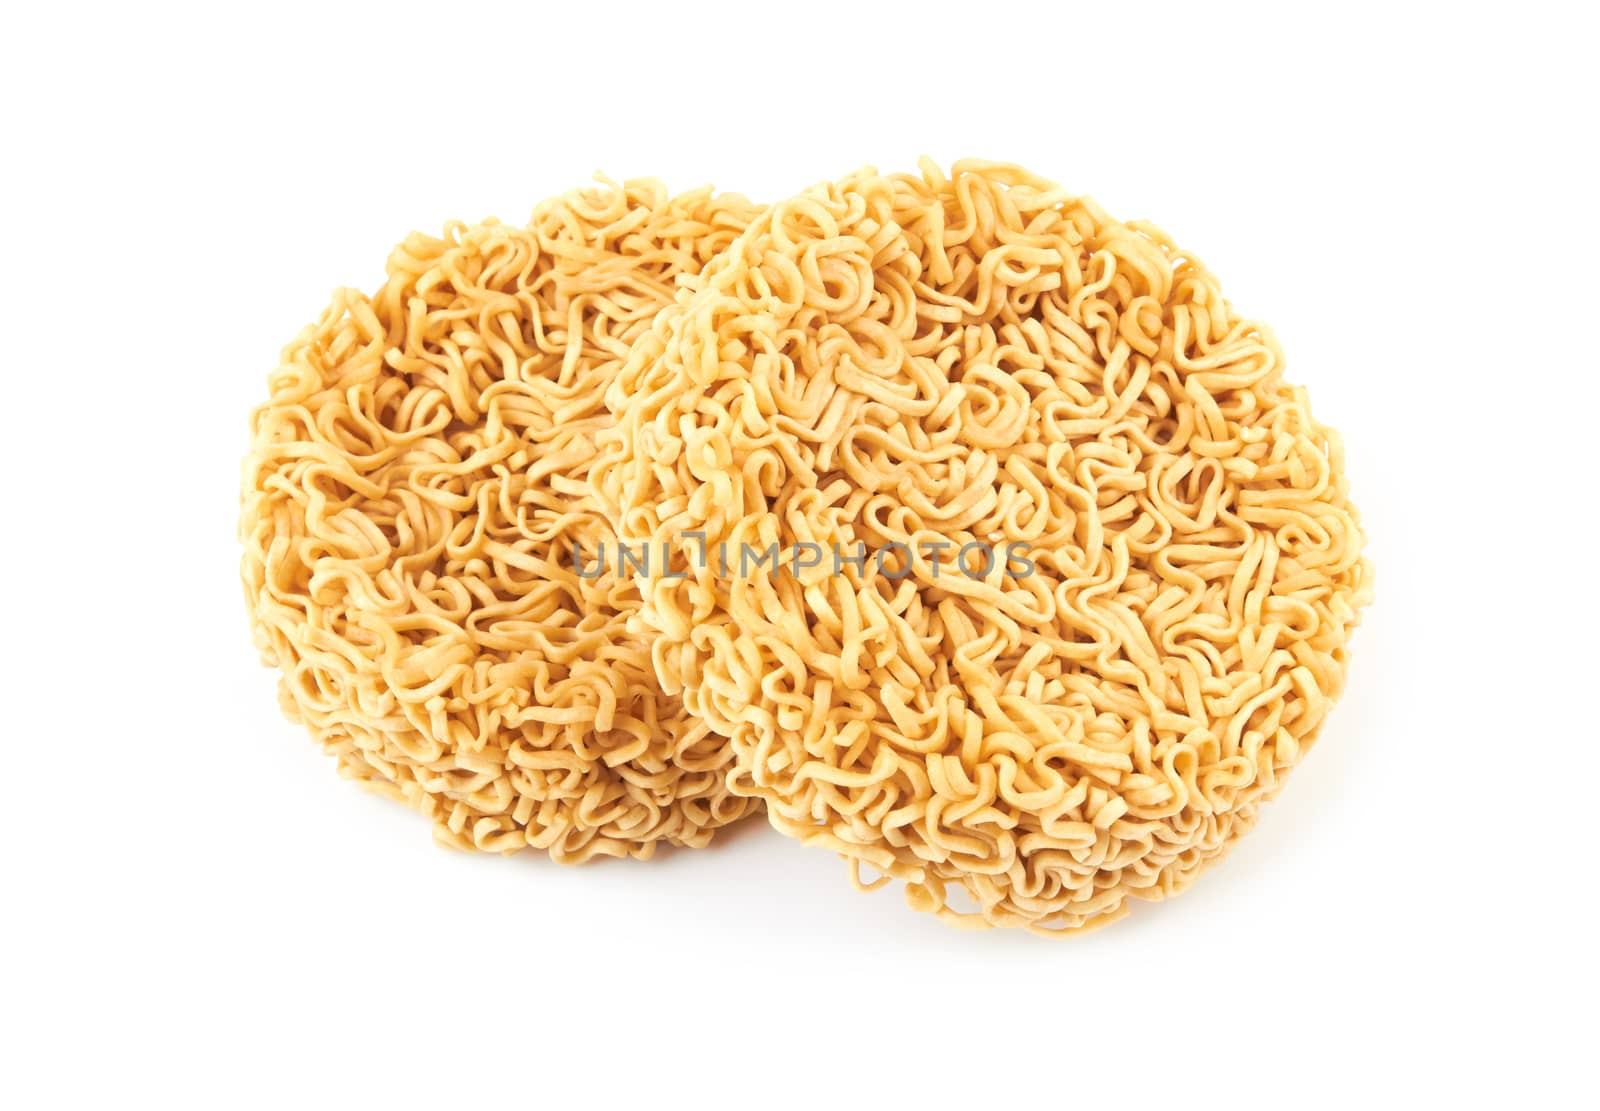 instant noodles on white by pioneer111